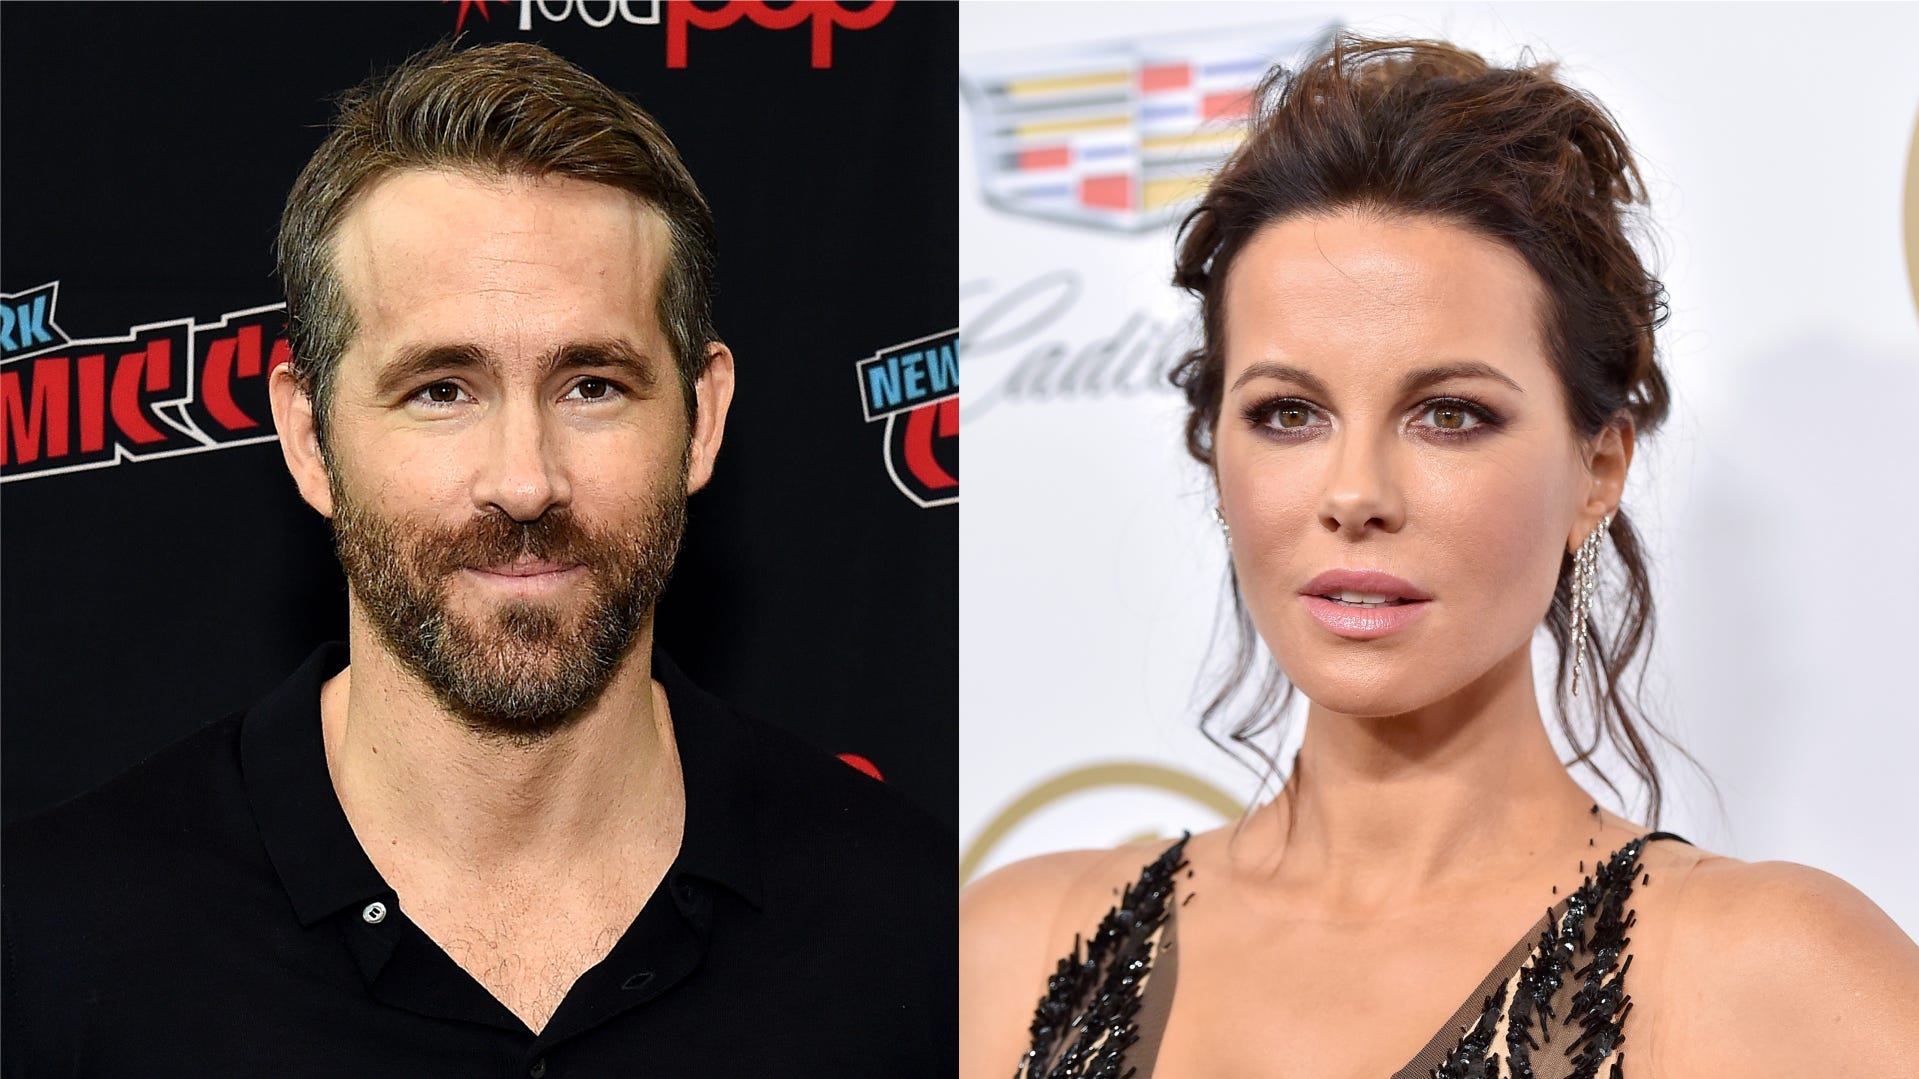 Kate Beckinsales Twin Ryan Reynolds Reacts To Claim They Look Alike 